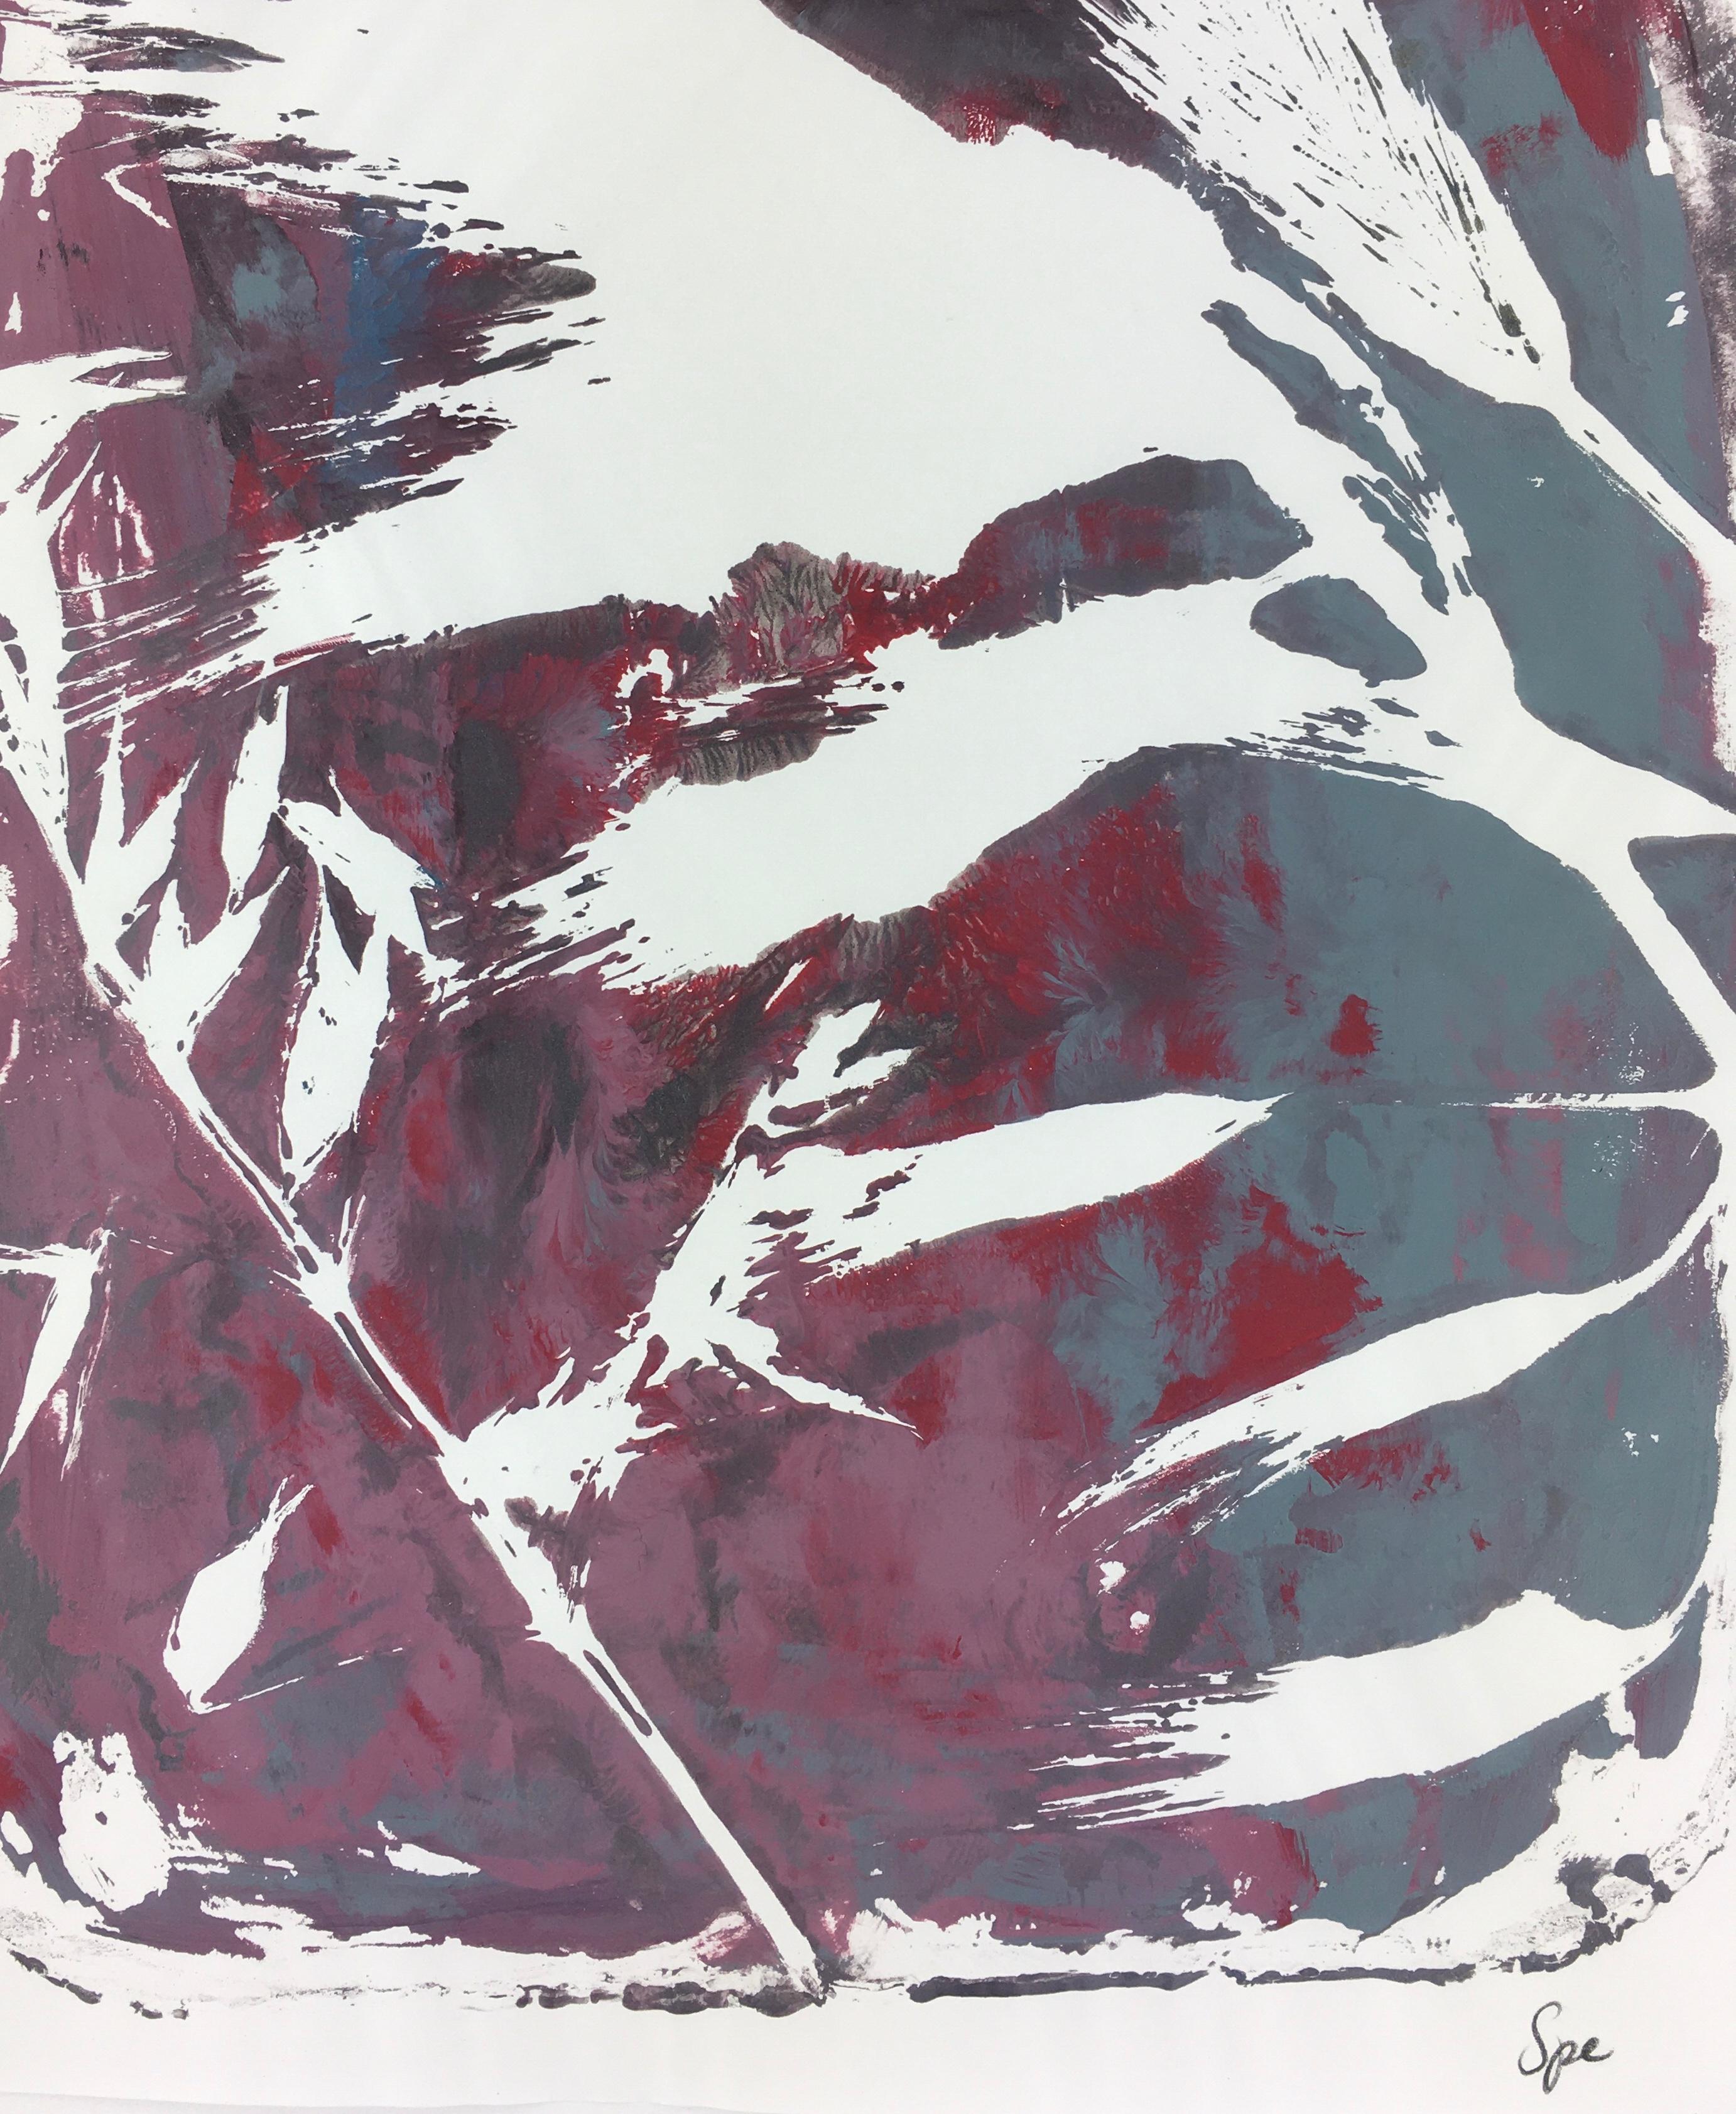 Modern abstract painting of grass and leaves in reds and gray by artist Spe, 2013. Signed lower right.  

Original artwork on paper displayed on a white mat with a gold border. Mat fits a standard-size frame.  Archival plastic sleeve and Certificate